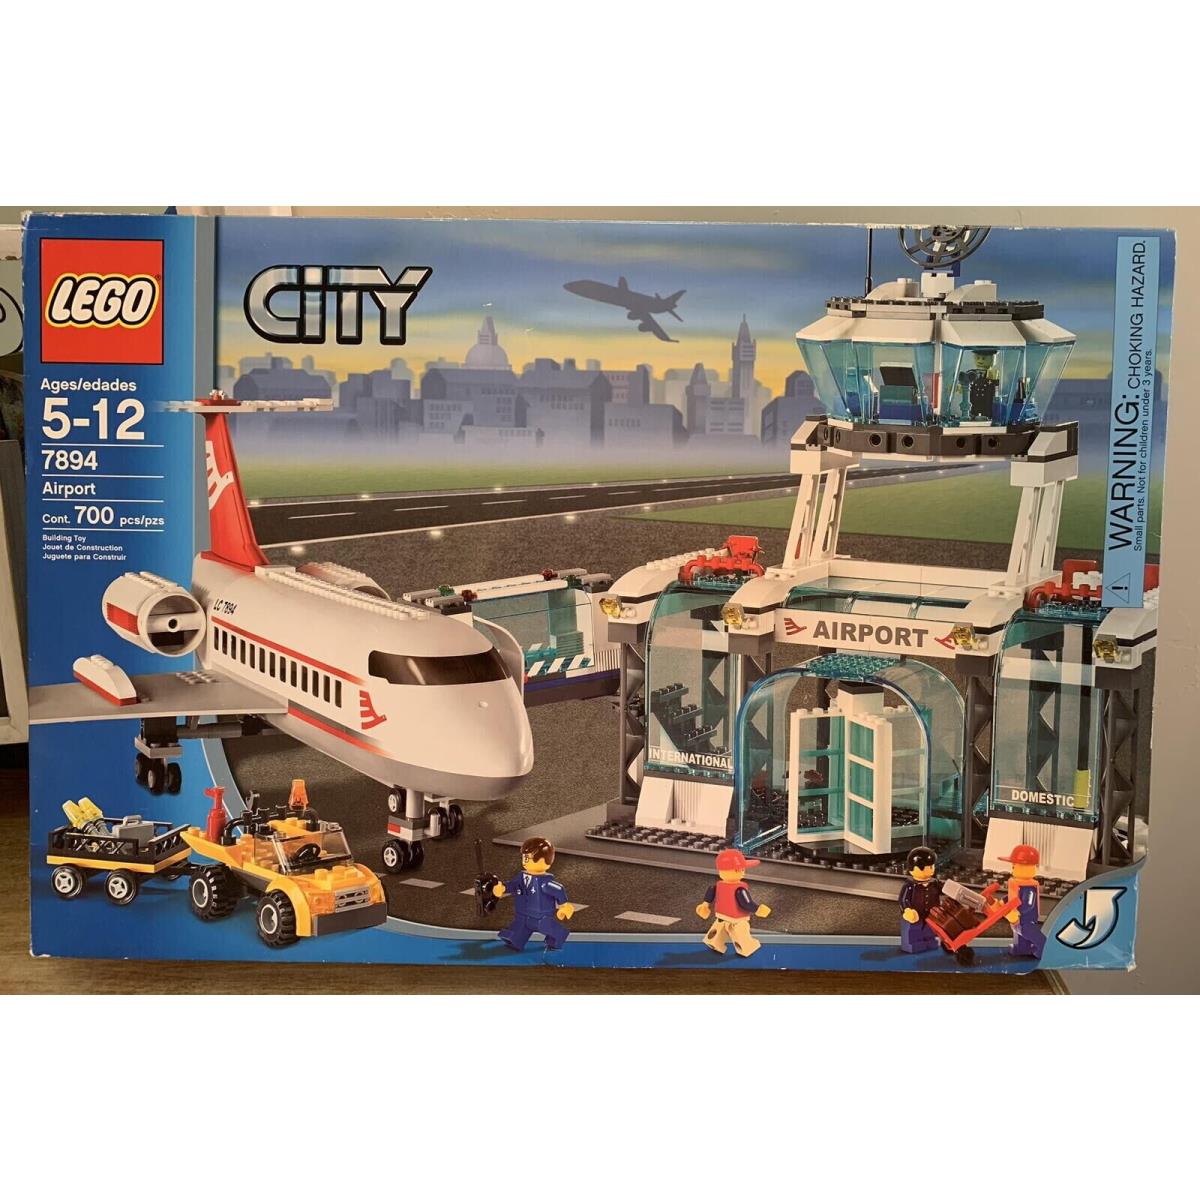 Lego City Airport 7894 700 Pcs Ages 5-12 2006 Rare Retired Plane Airplane